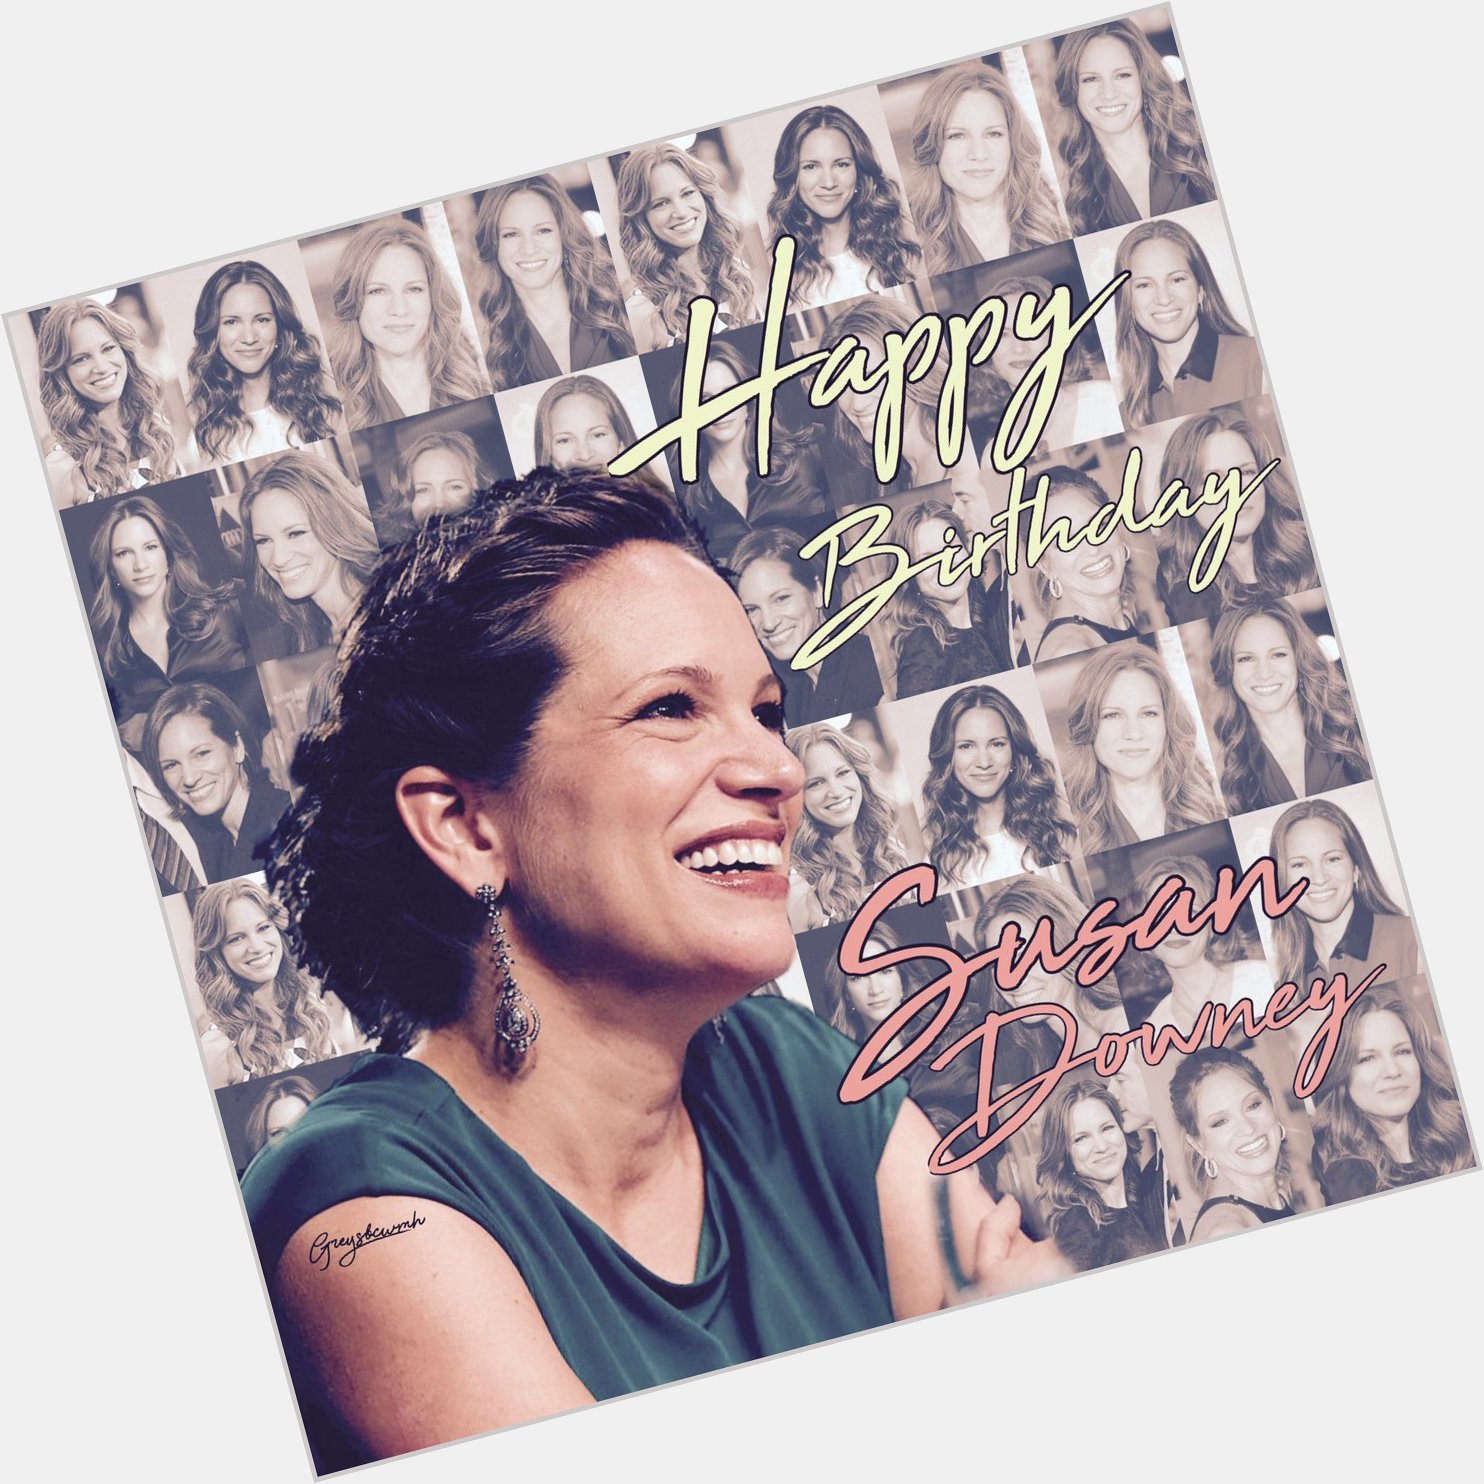 Officially the 6th here! Must greet the Queen! 

Happy Birthday Mrs Susan Downey!  